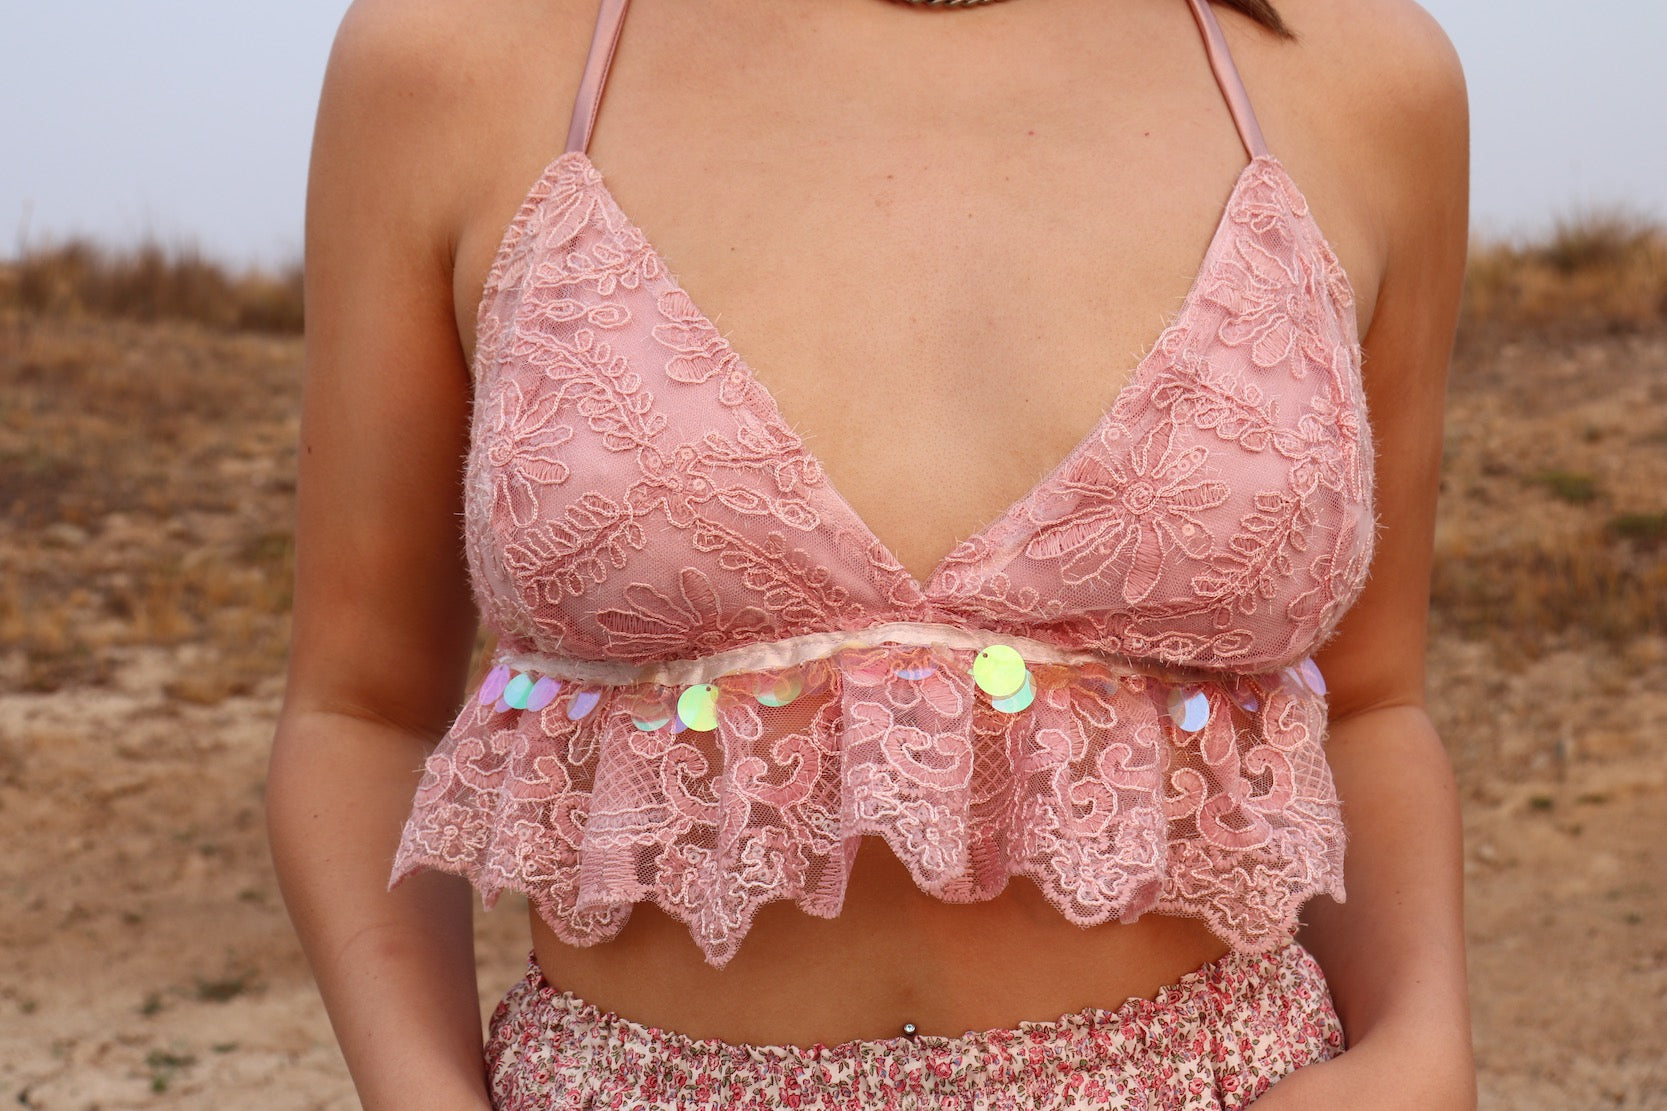 Create Your Own - Lace Up Bralette